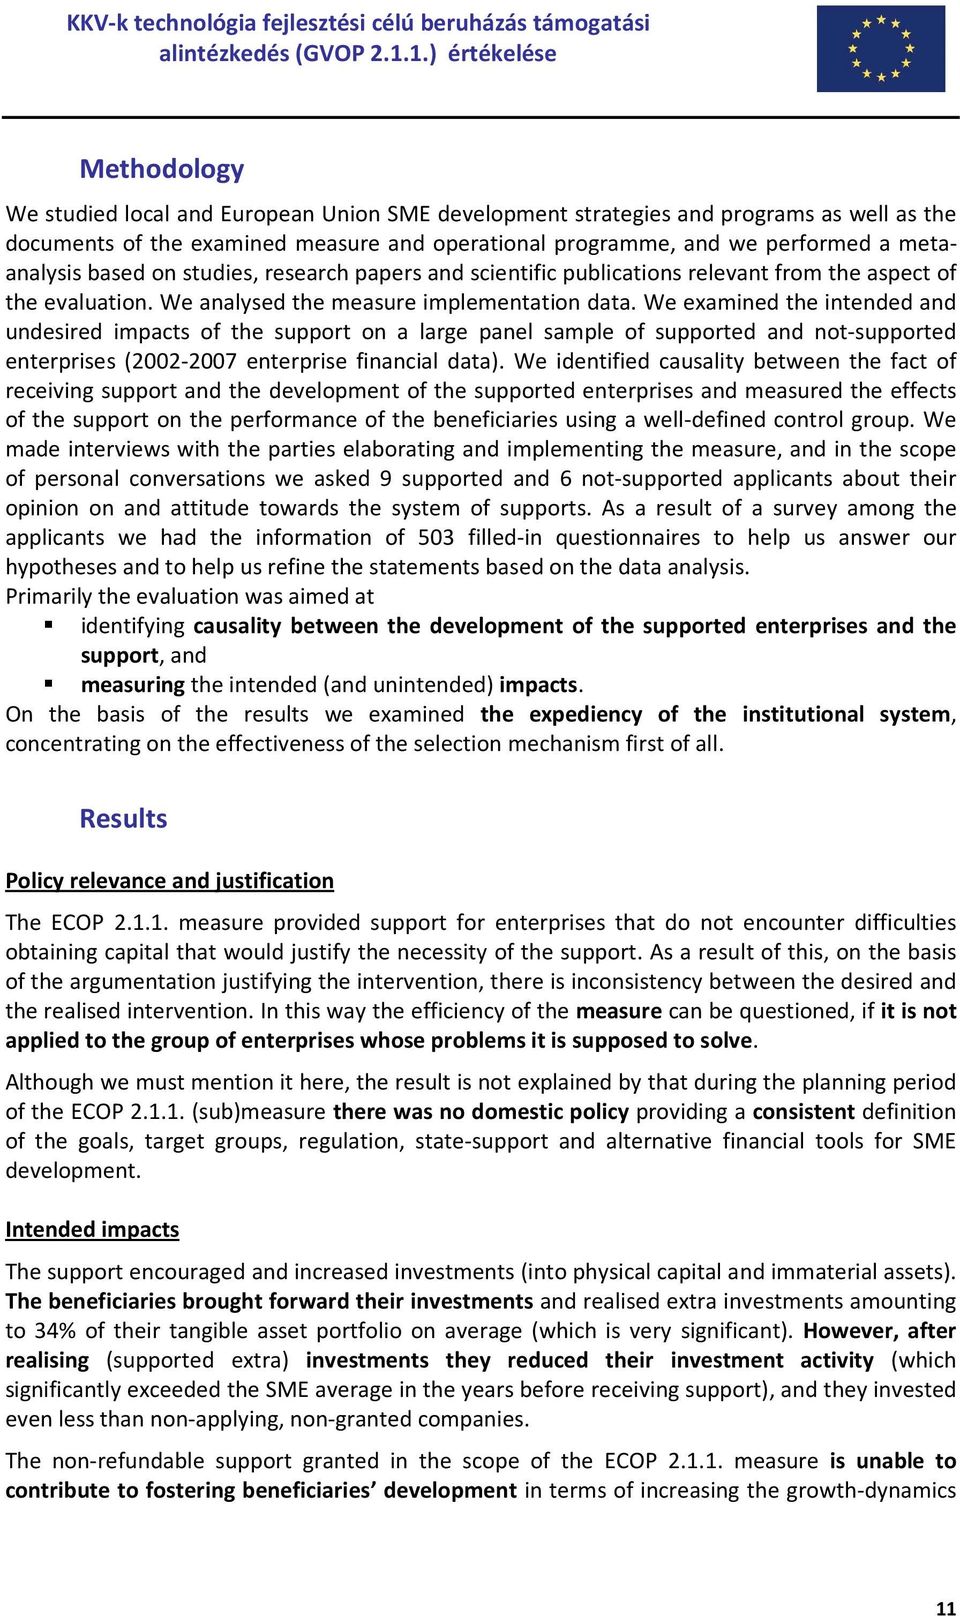 We examined the intended and undesired impacts of the support on a large panel sample of supported and not-supported enterprises (2002-2007 enterprise financial data).